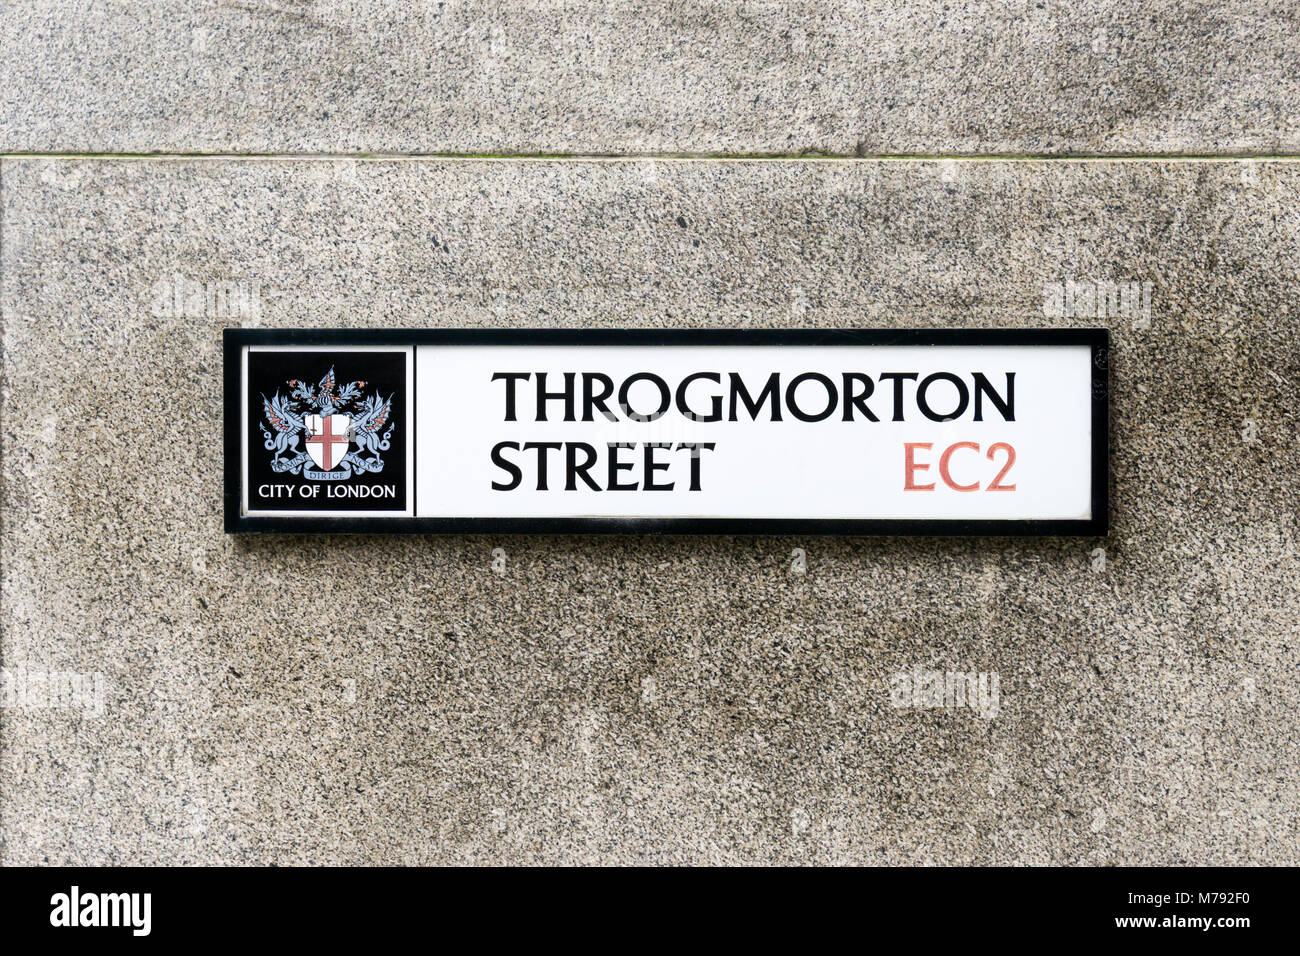 Street sign for Throgmorton Street in the City of London Stock Photo